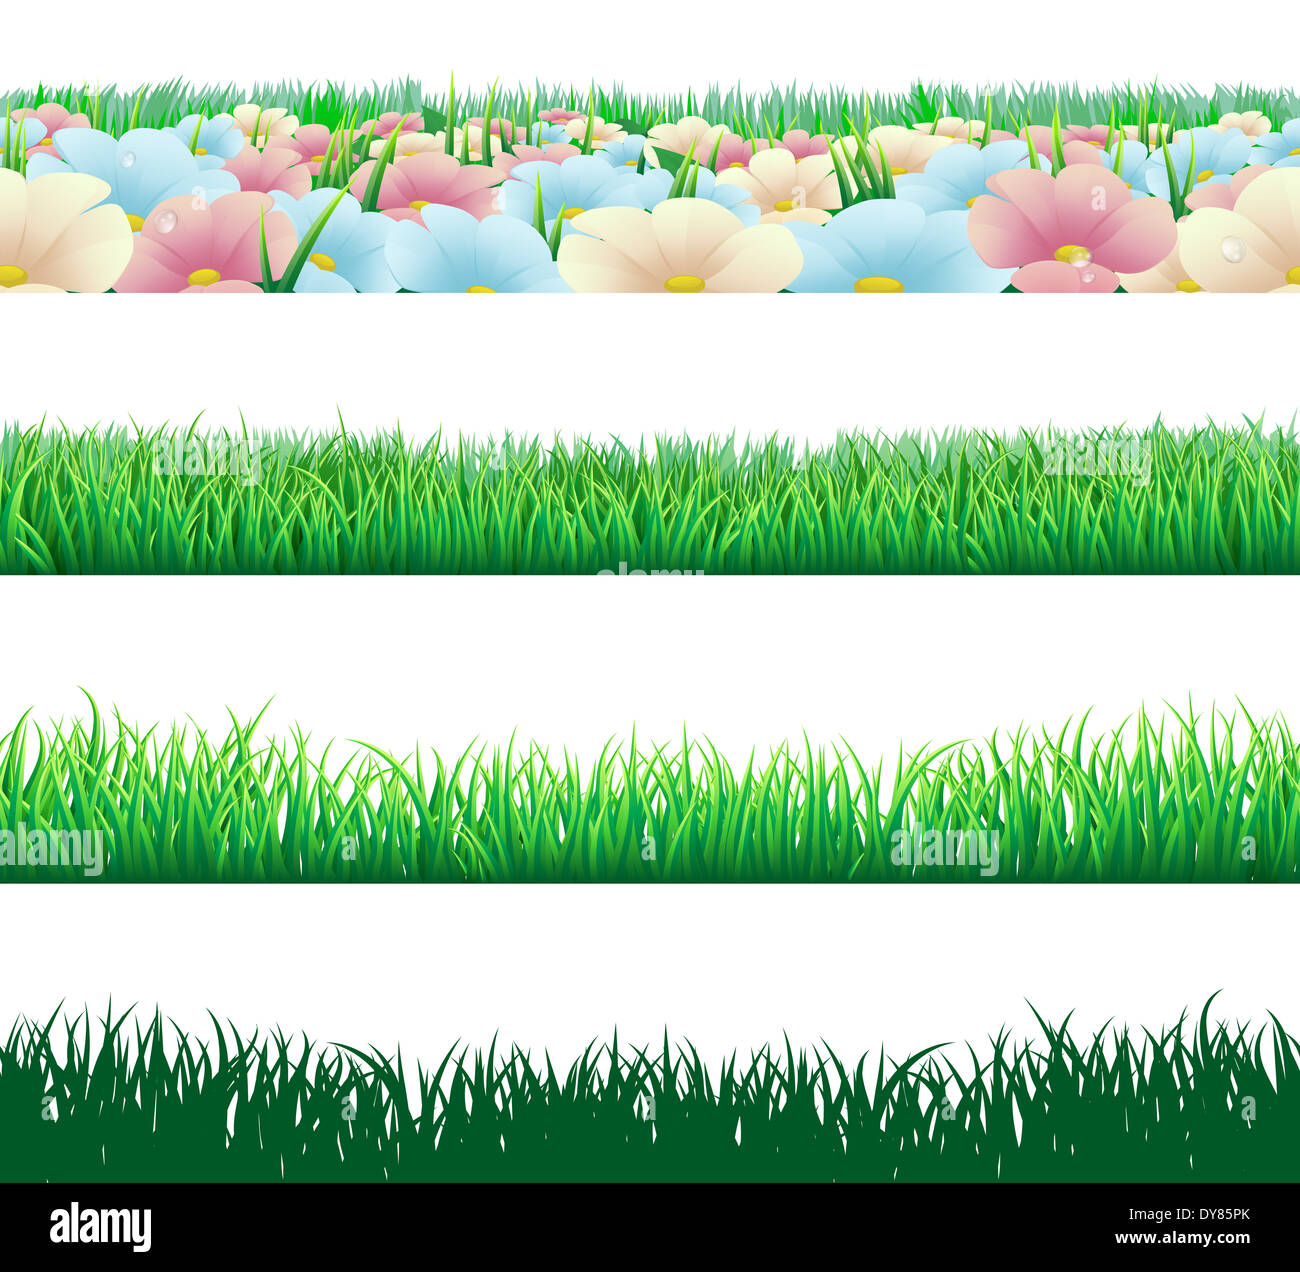 A set of seamlessly tilable grass and flower footer deign elements Stock Photo